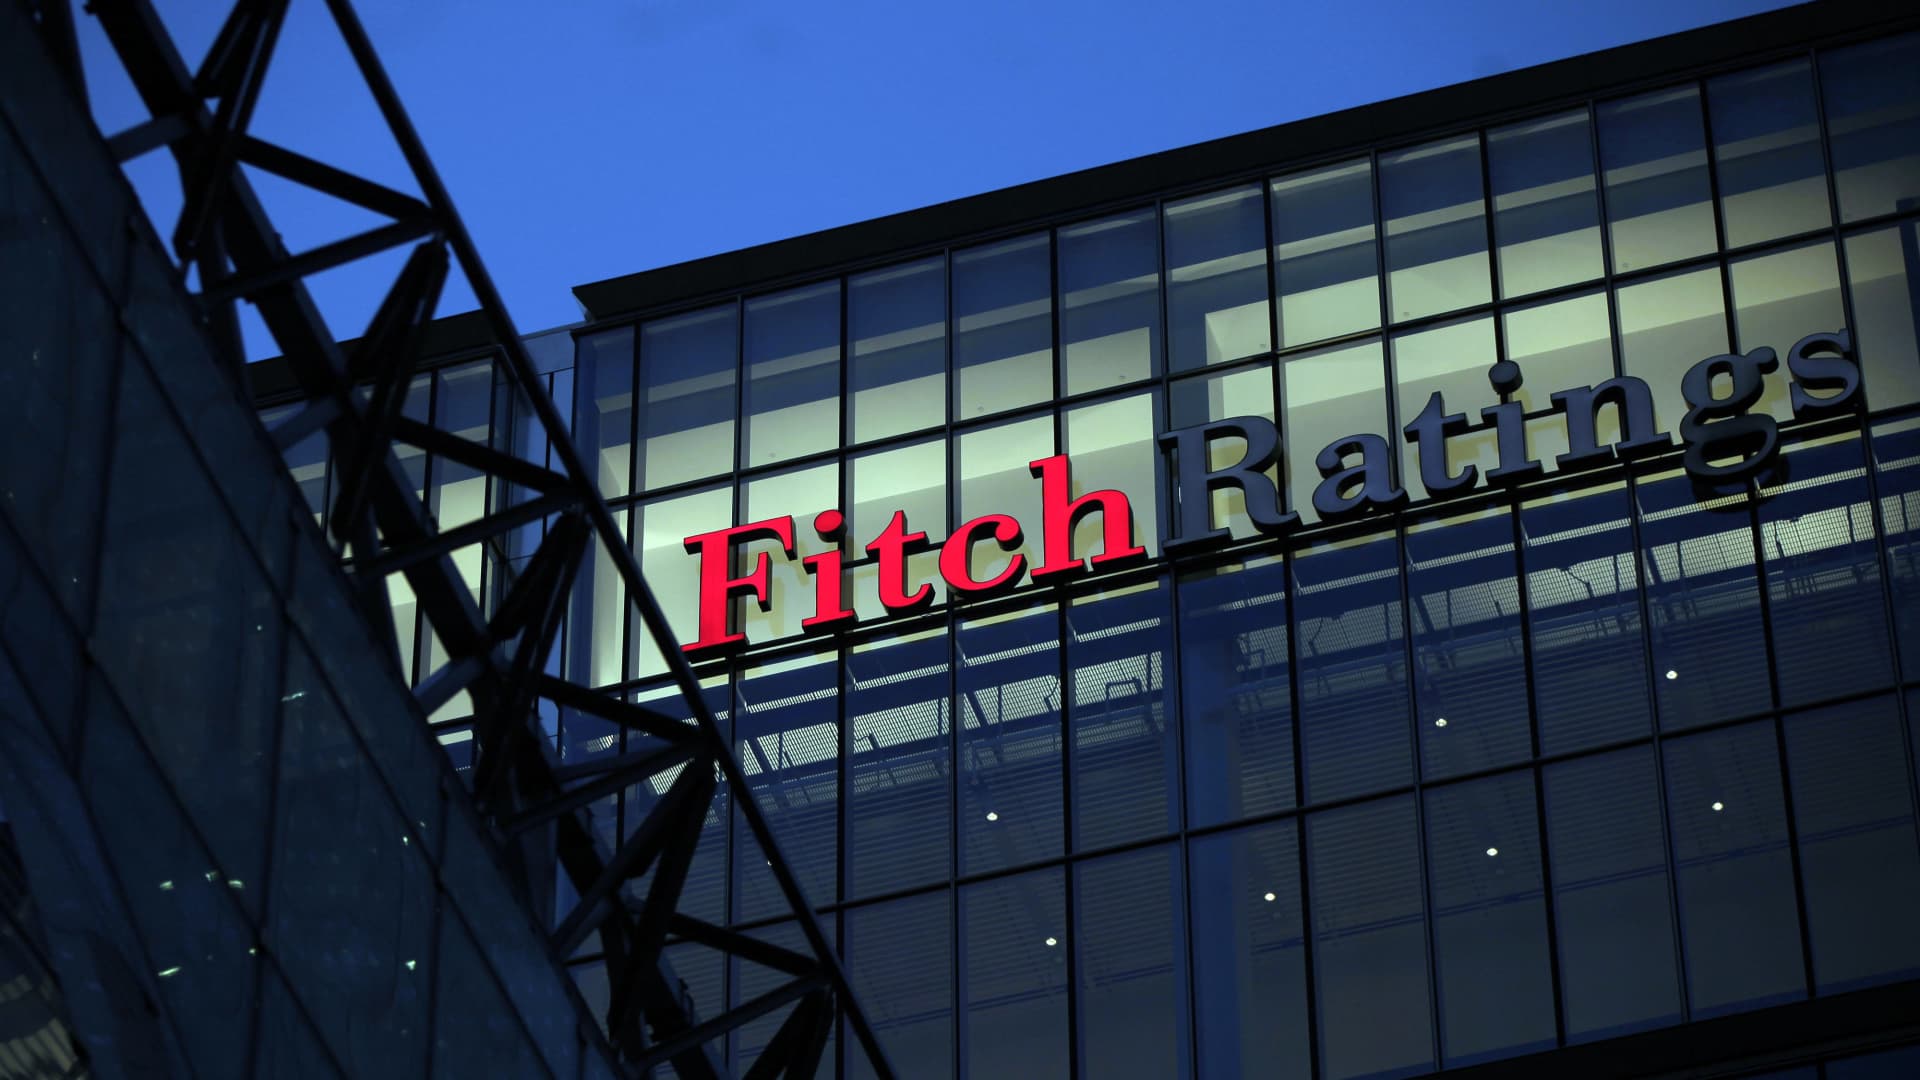 Fitch warns it may be forced to downgrade dozens of banks